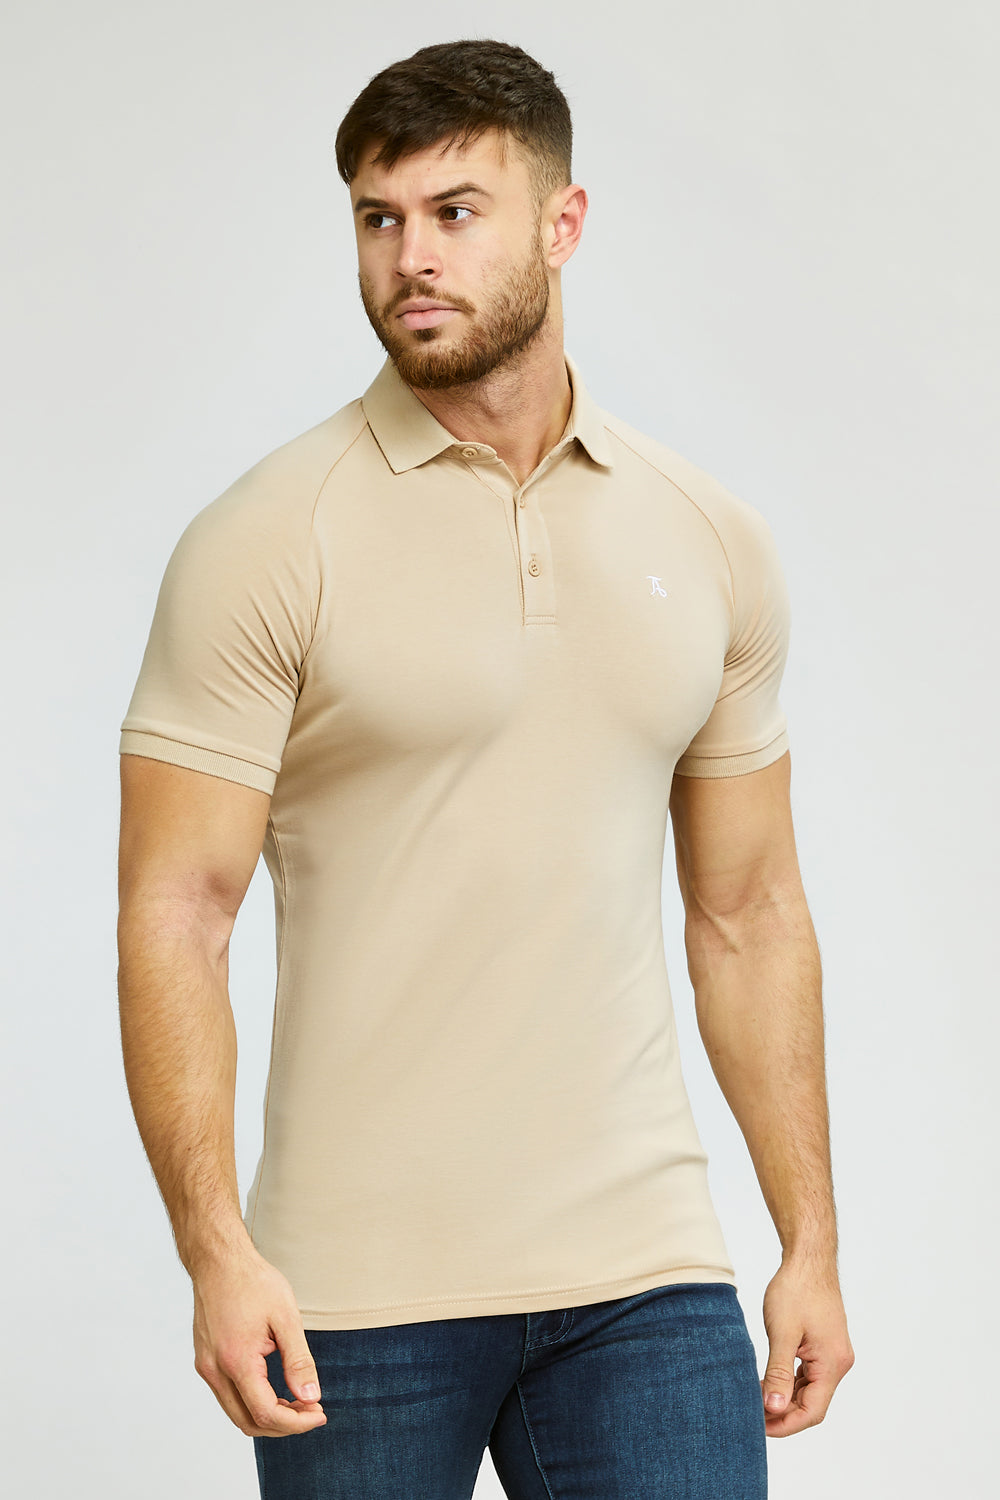 Athletic Fit Polo Shirt In Sandy Coast - TAILORED ATHLETE